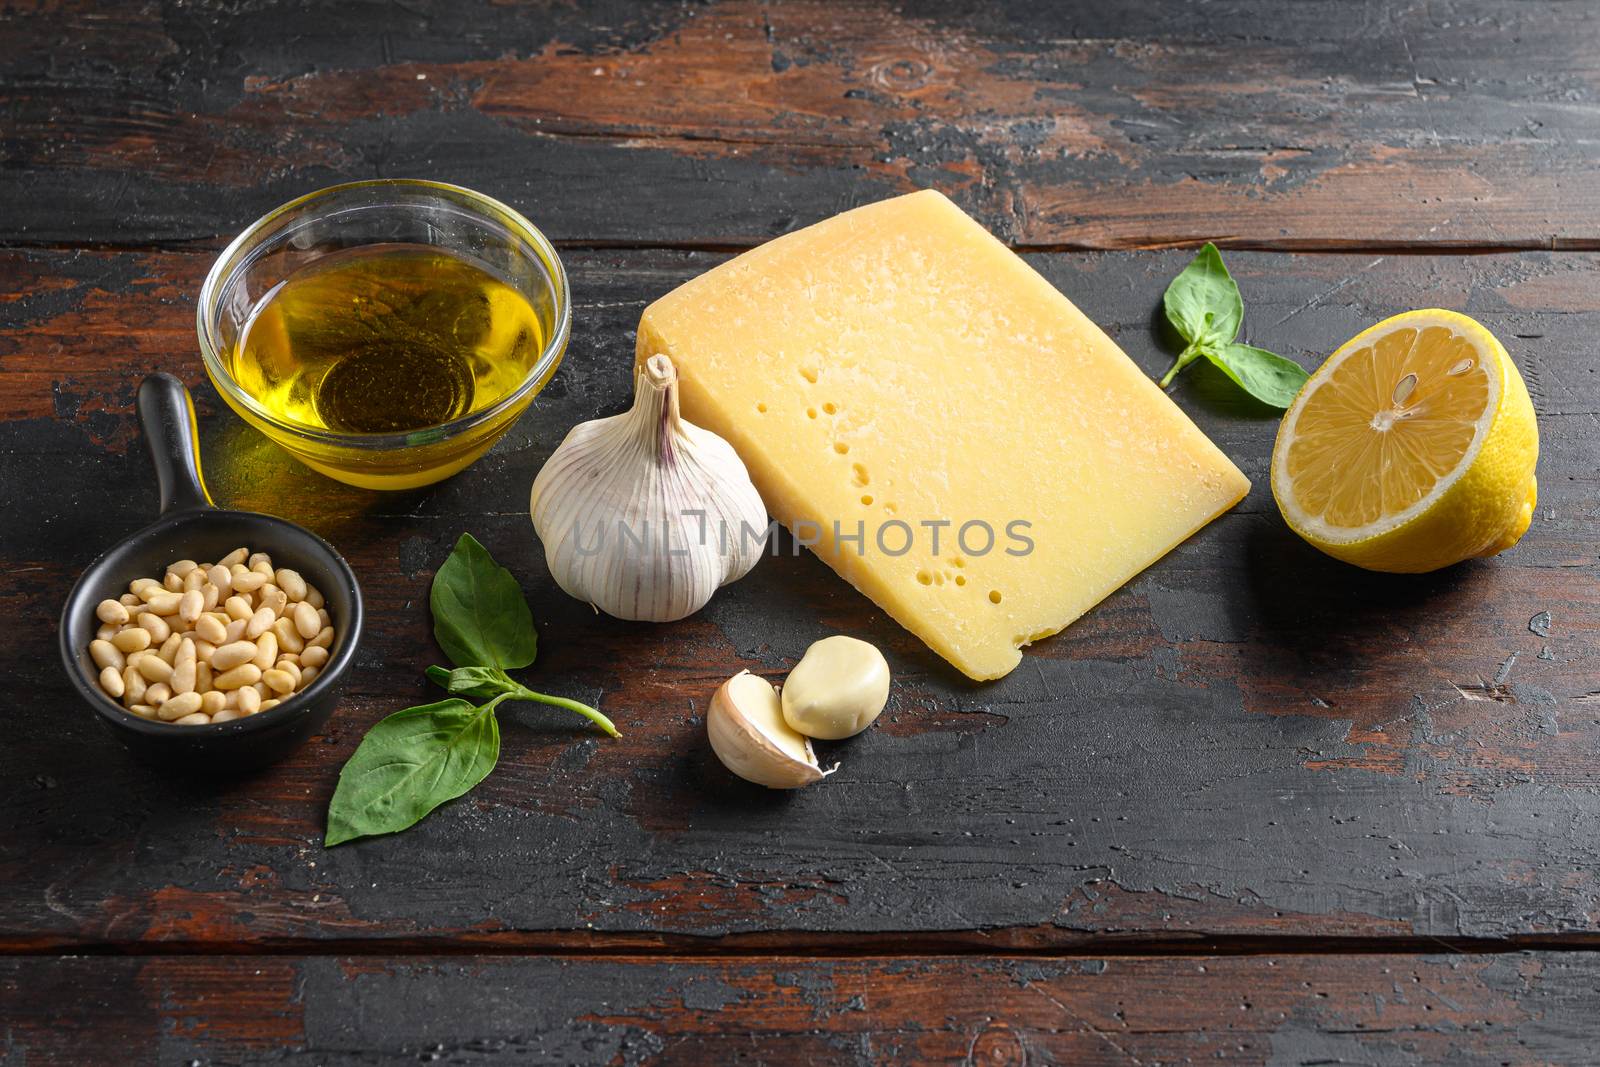 Green basil pesto italian recipe Preparing Parmesan cheese, basil leaves, pine nuts, olive oil, garlic, salt and pepper. on wooden table side shot by Ilianesolenyi